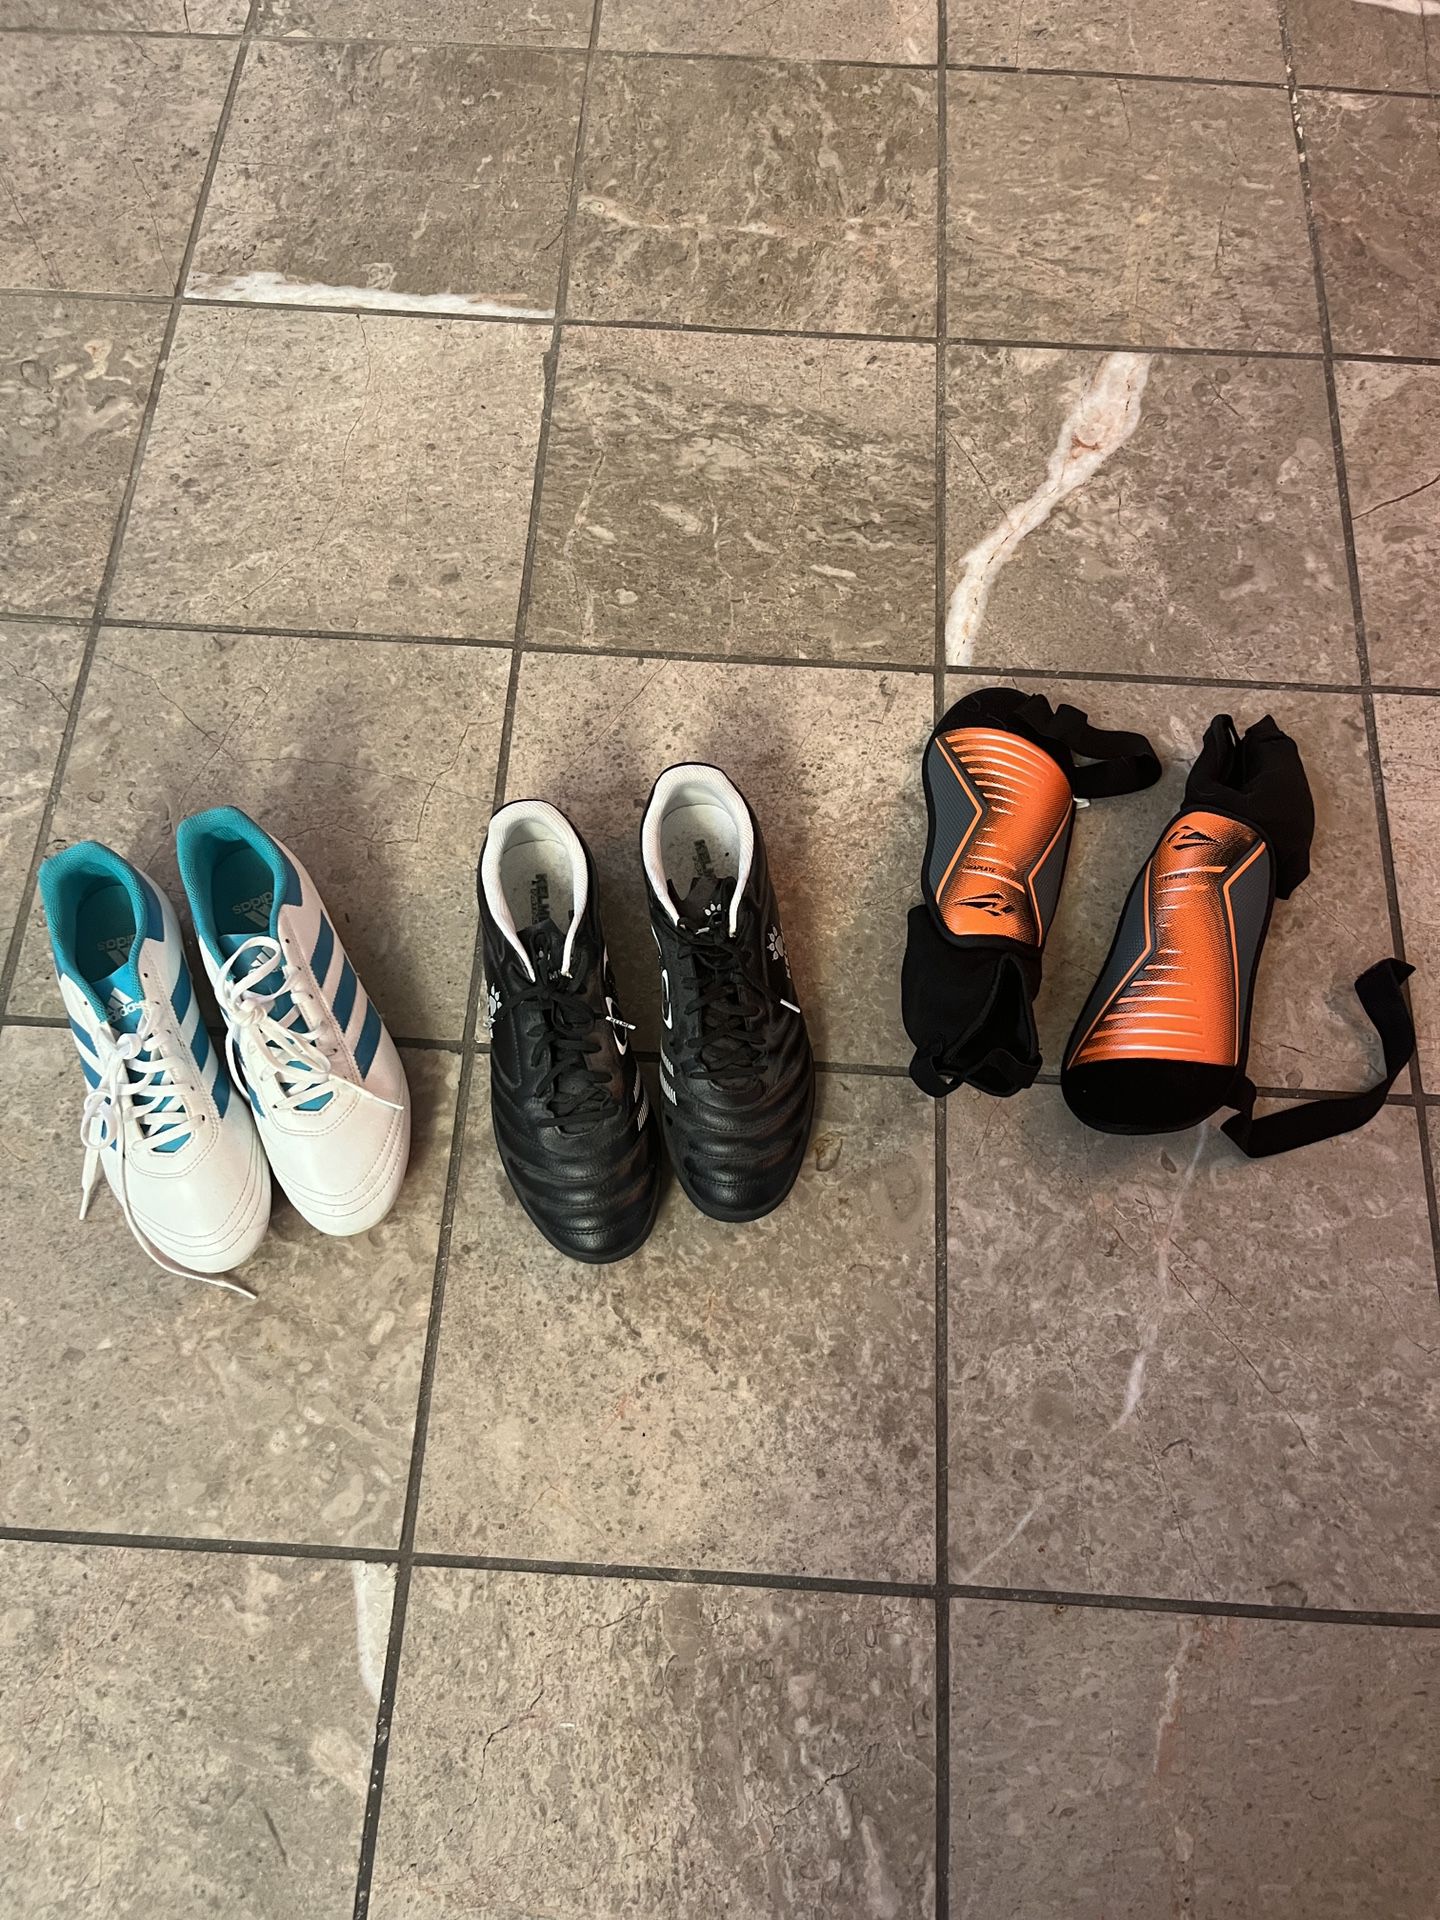 Football Cleats Size 10 for Sale in Las Vegas, NV - OfferUp